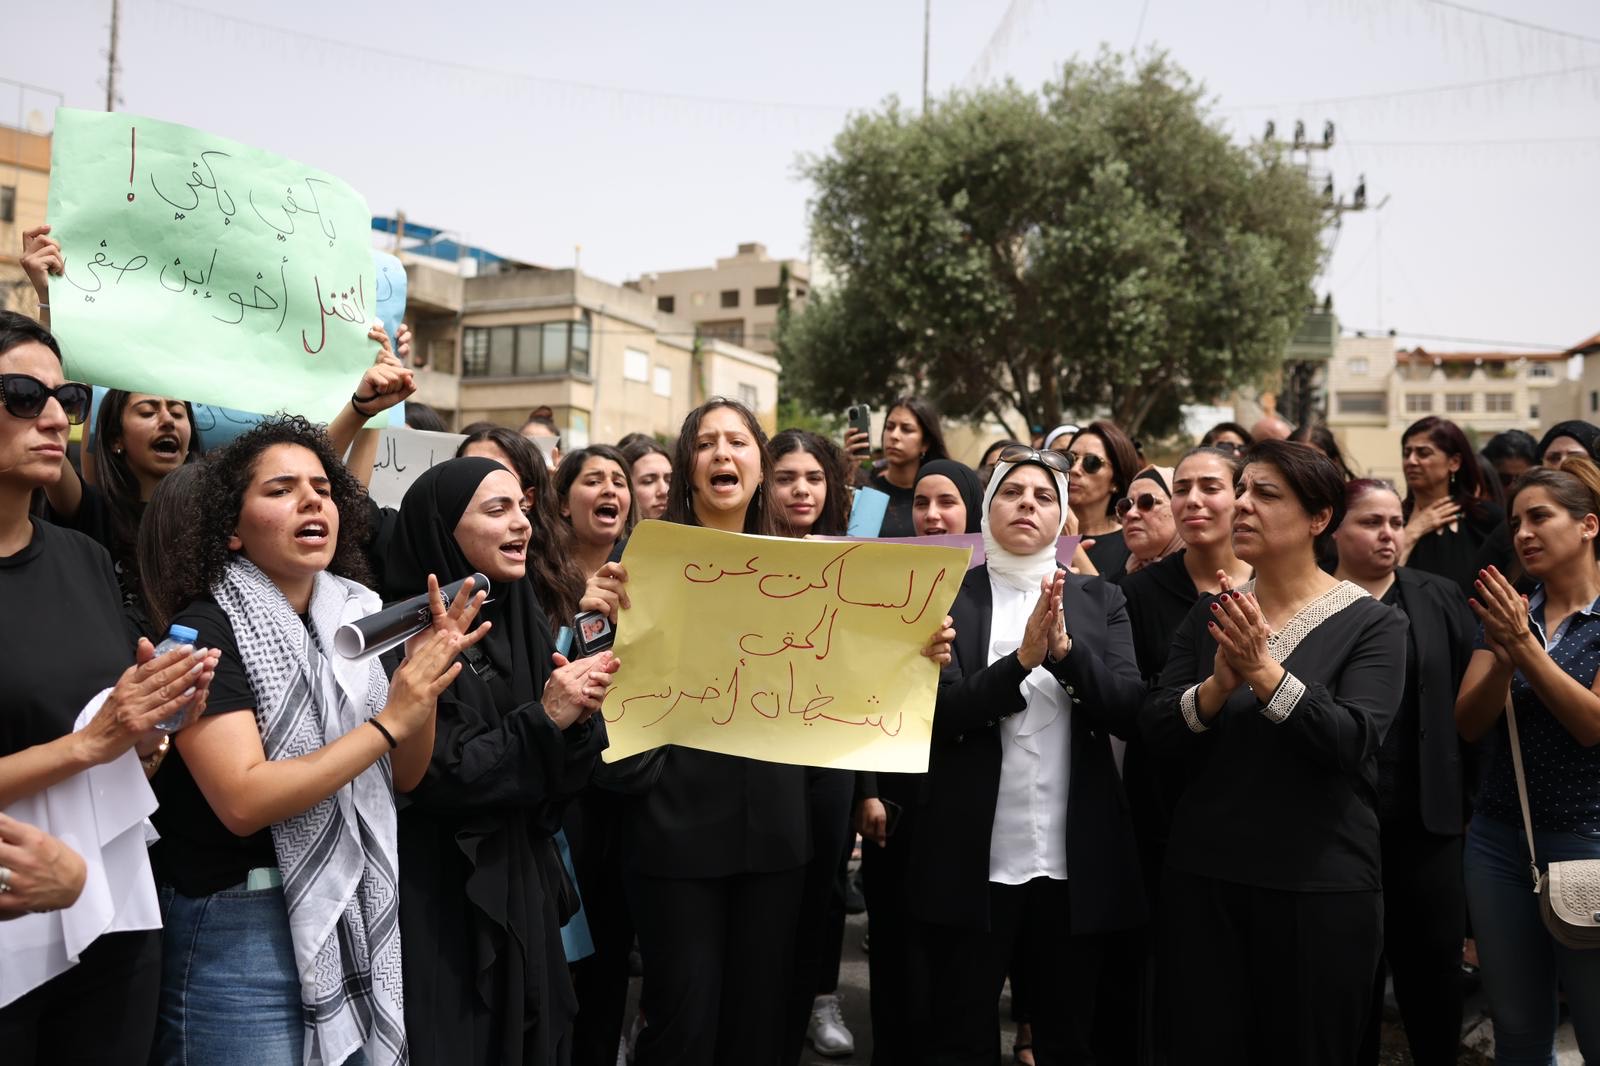 Mourners protest against violence at the funeral of 29-year-old Naeem Marjiyeh and 15-year-old Rami Marjiyeh in the the Catholic Church in the town of Yafa an-Nasariyye. The two were murdered, among three others, in a criminal shooting. June 9, 2023. (Oren Ziv)